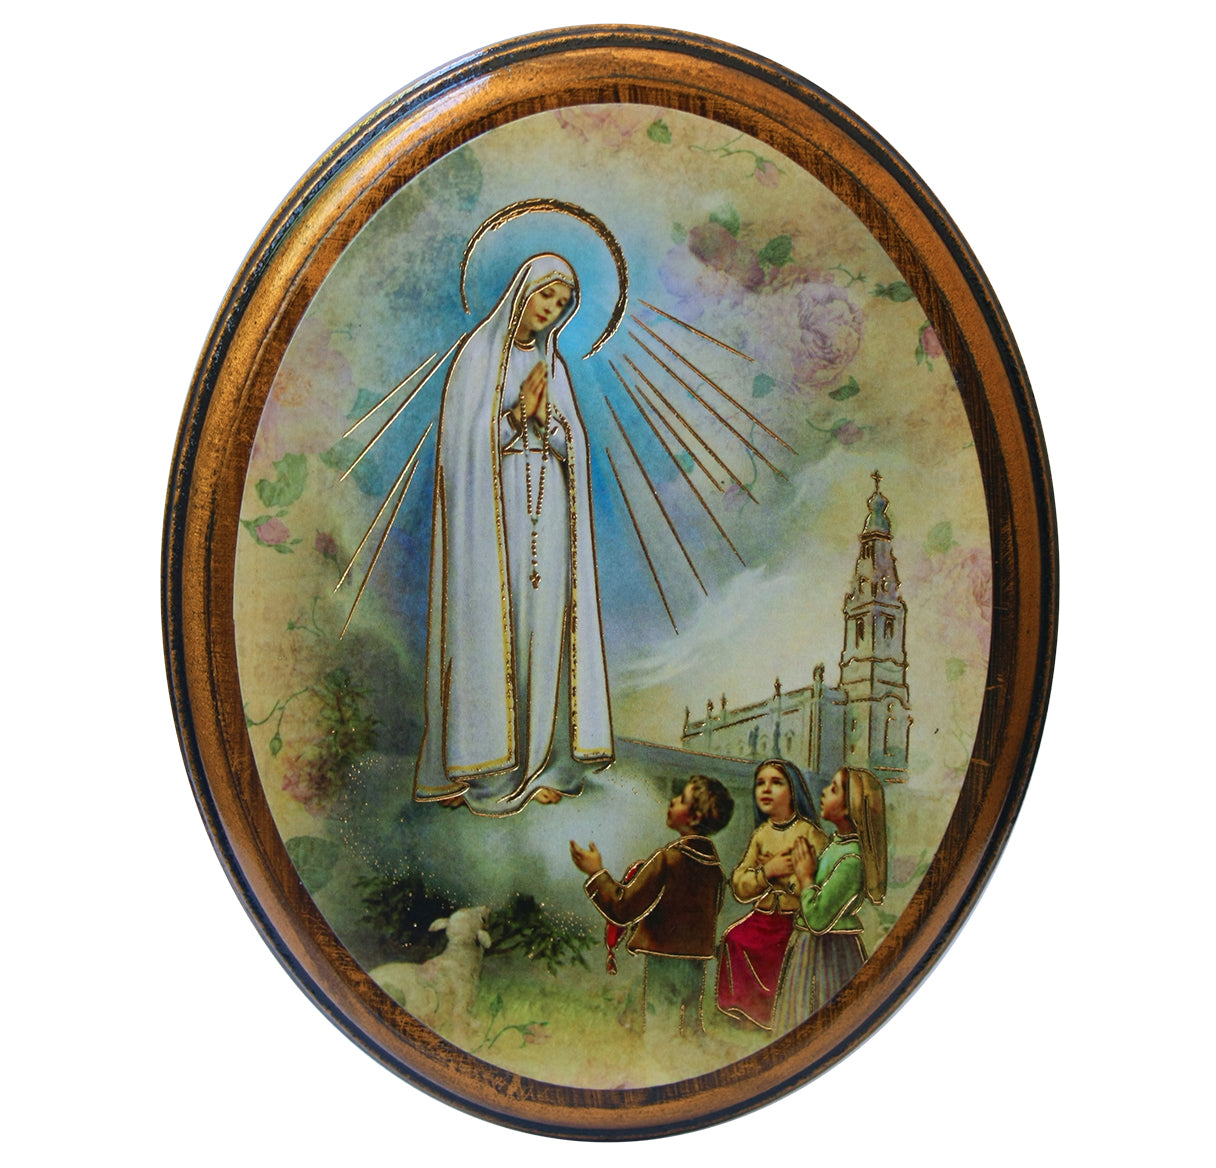 Our Lady of Fatima Antiqued Wood Plaque